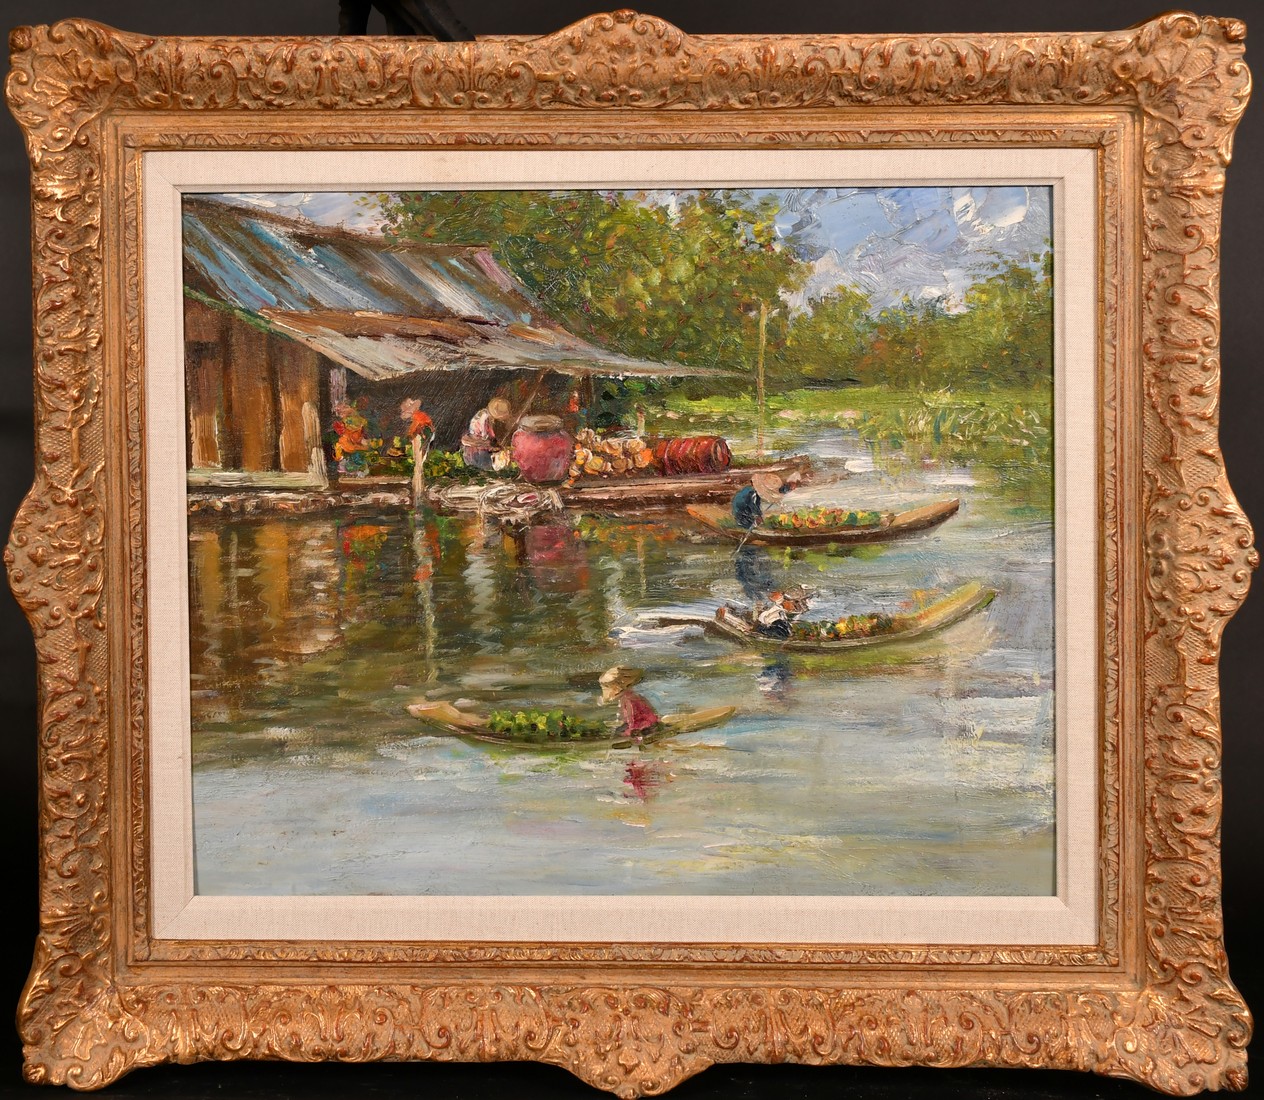 20th Century, possibly a South East Asian view of figures in traditional boats by a dwelling, oil on - Image 2 of 3